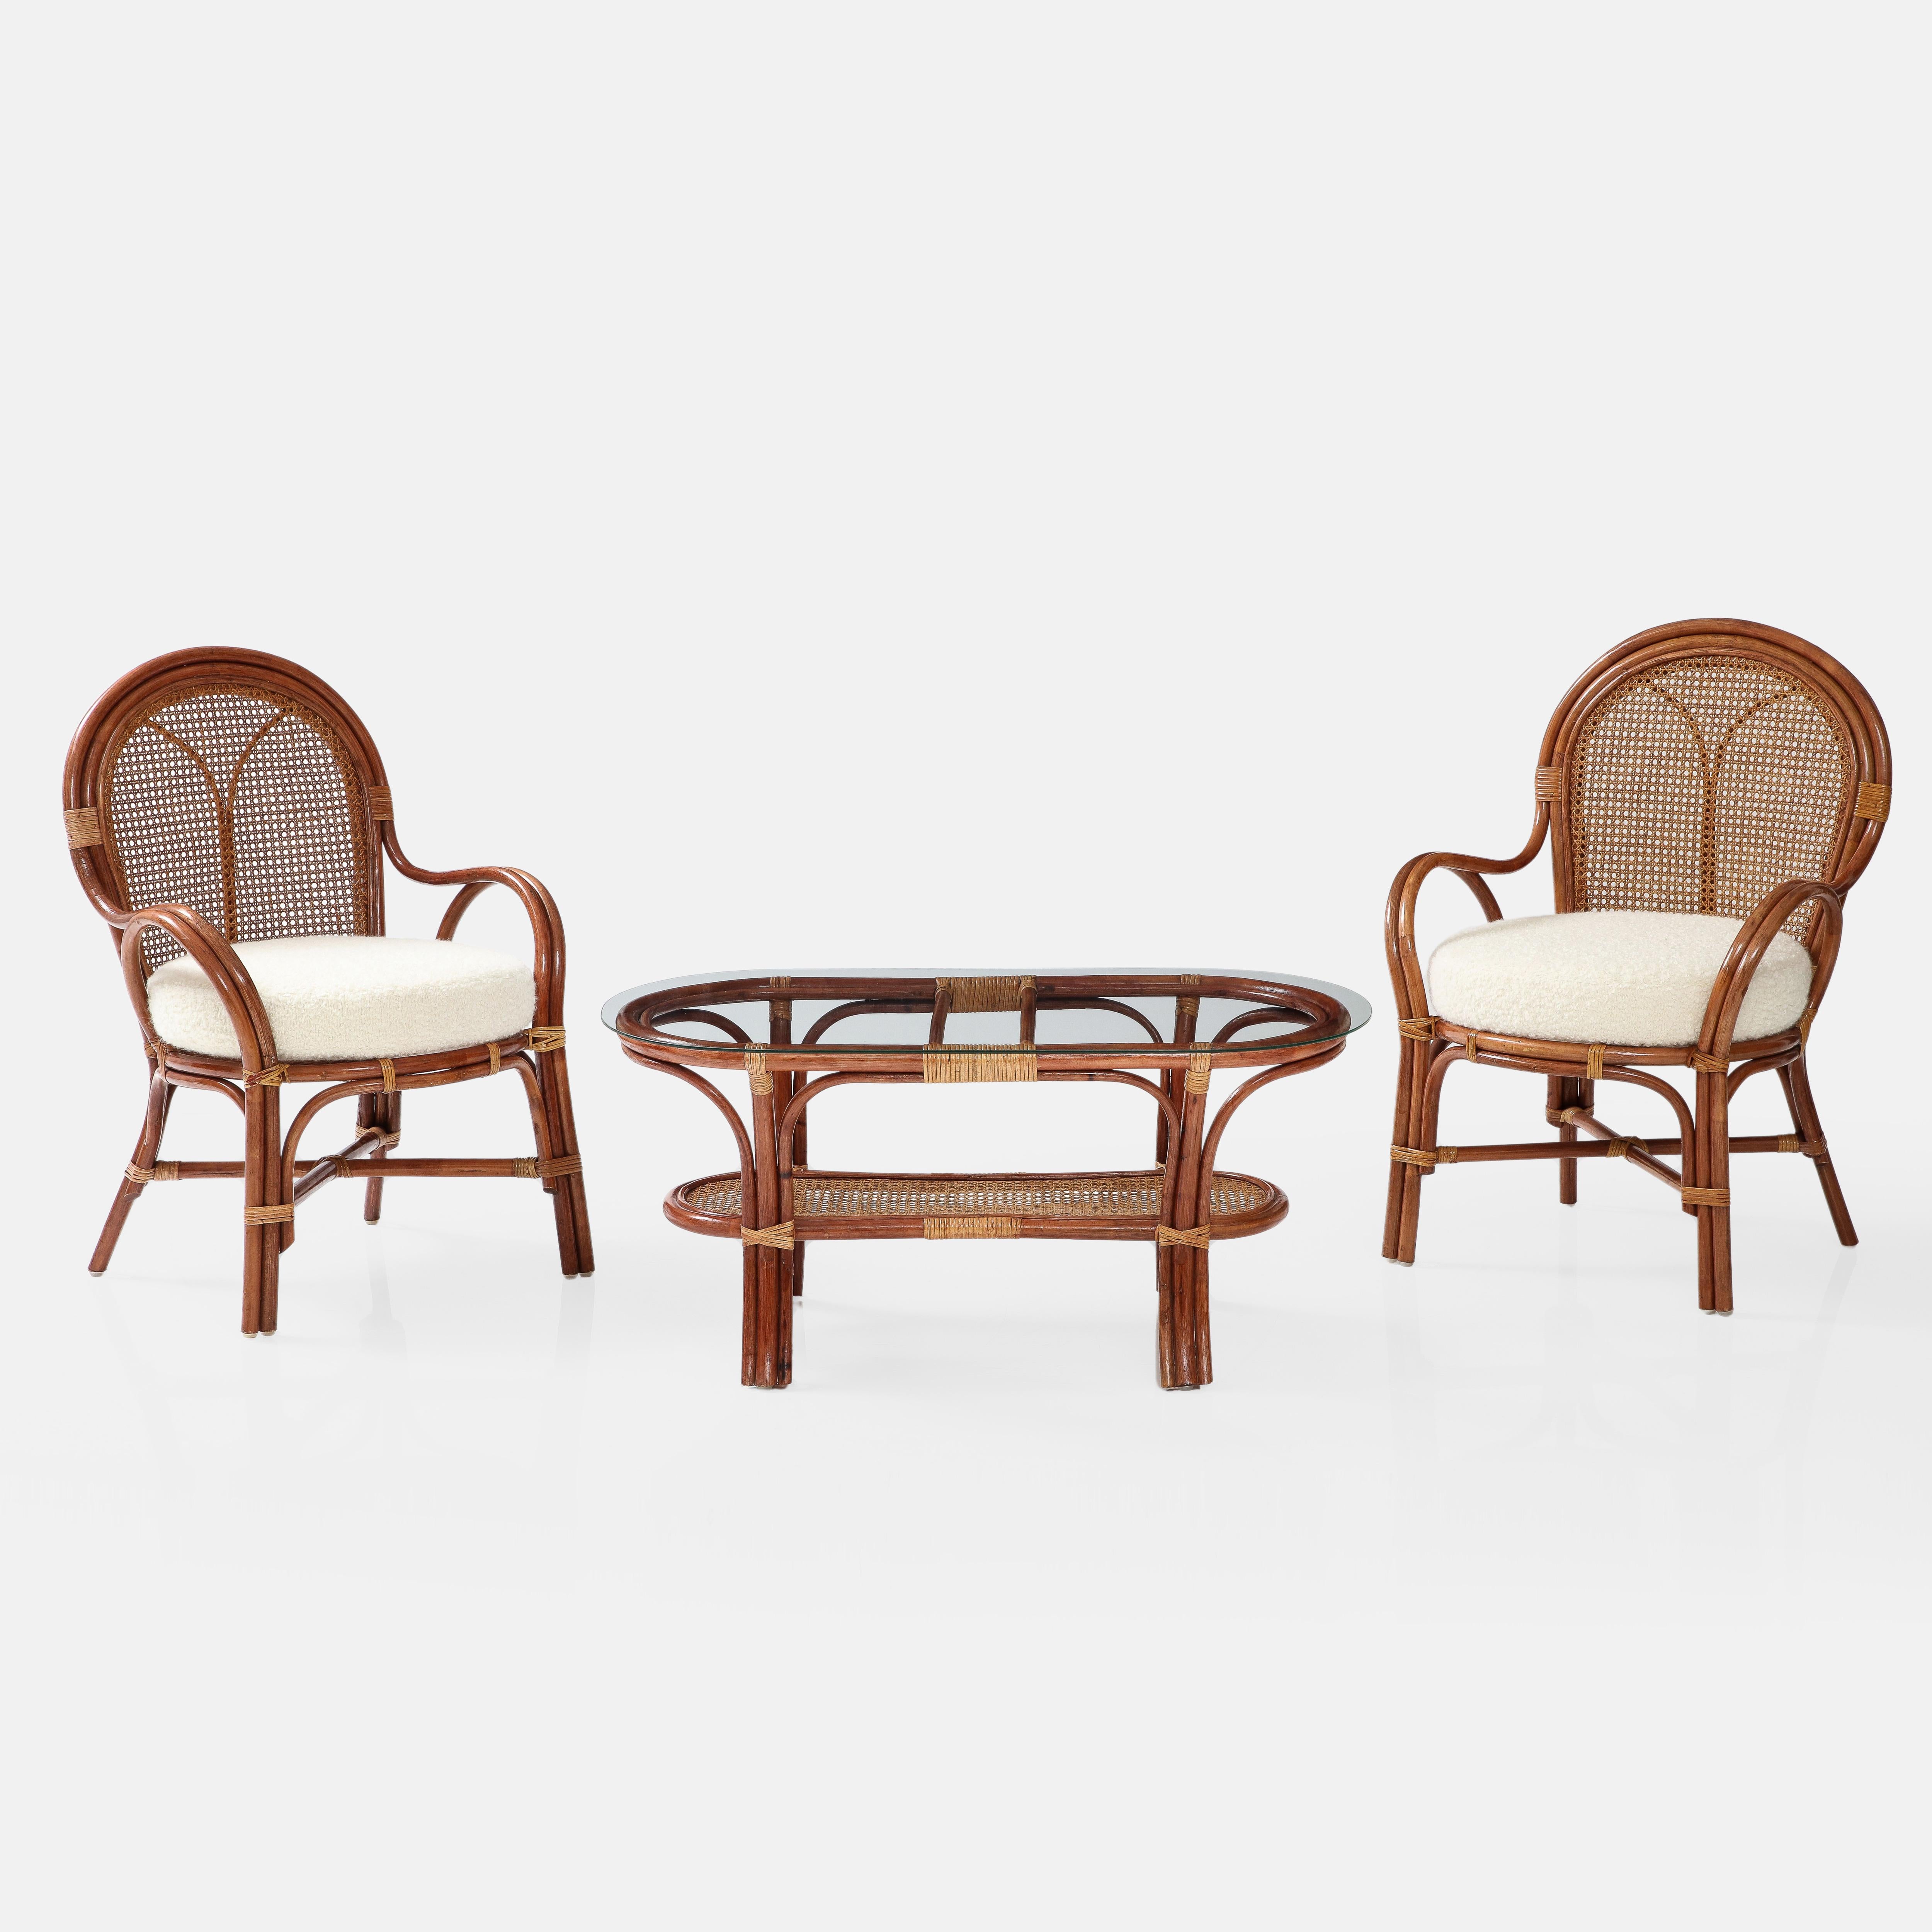 1950s Italian Pair of Bamboo and Rattan Armchairs with Ivory Bouclé Cushions For Sale 5